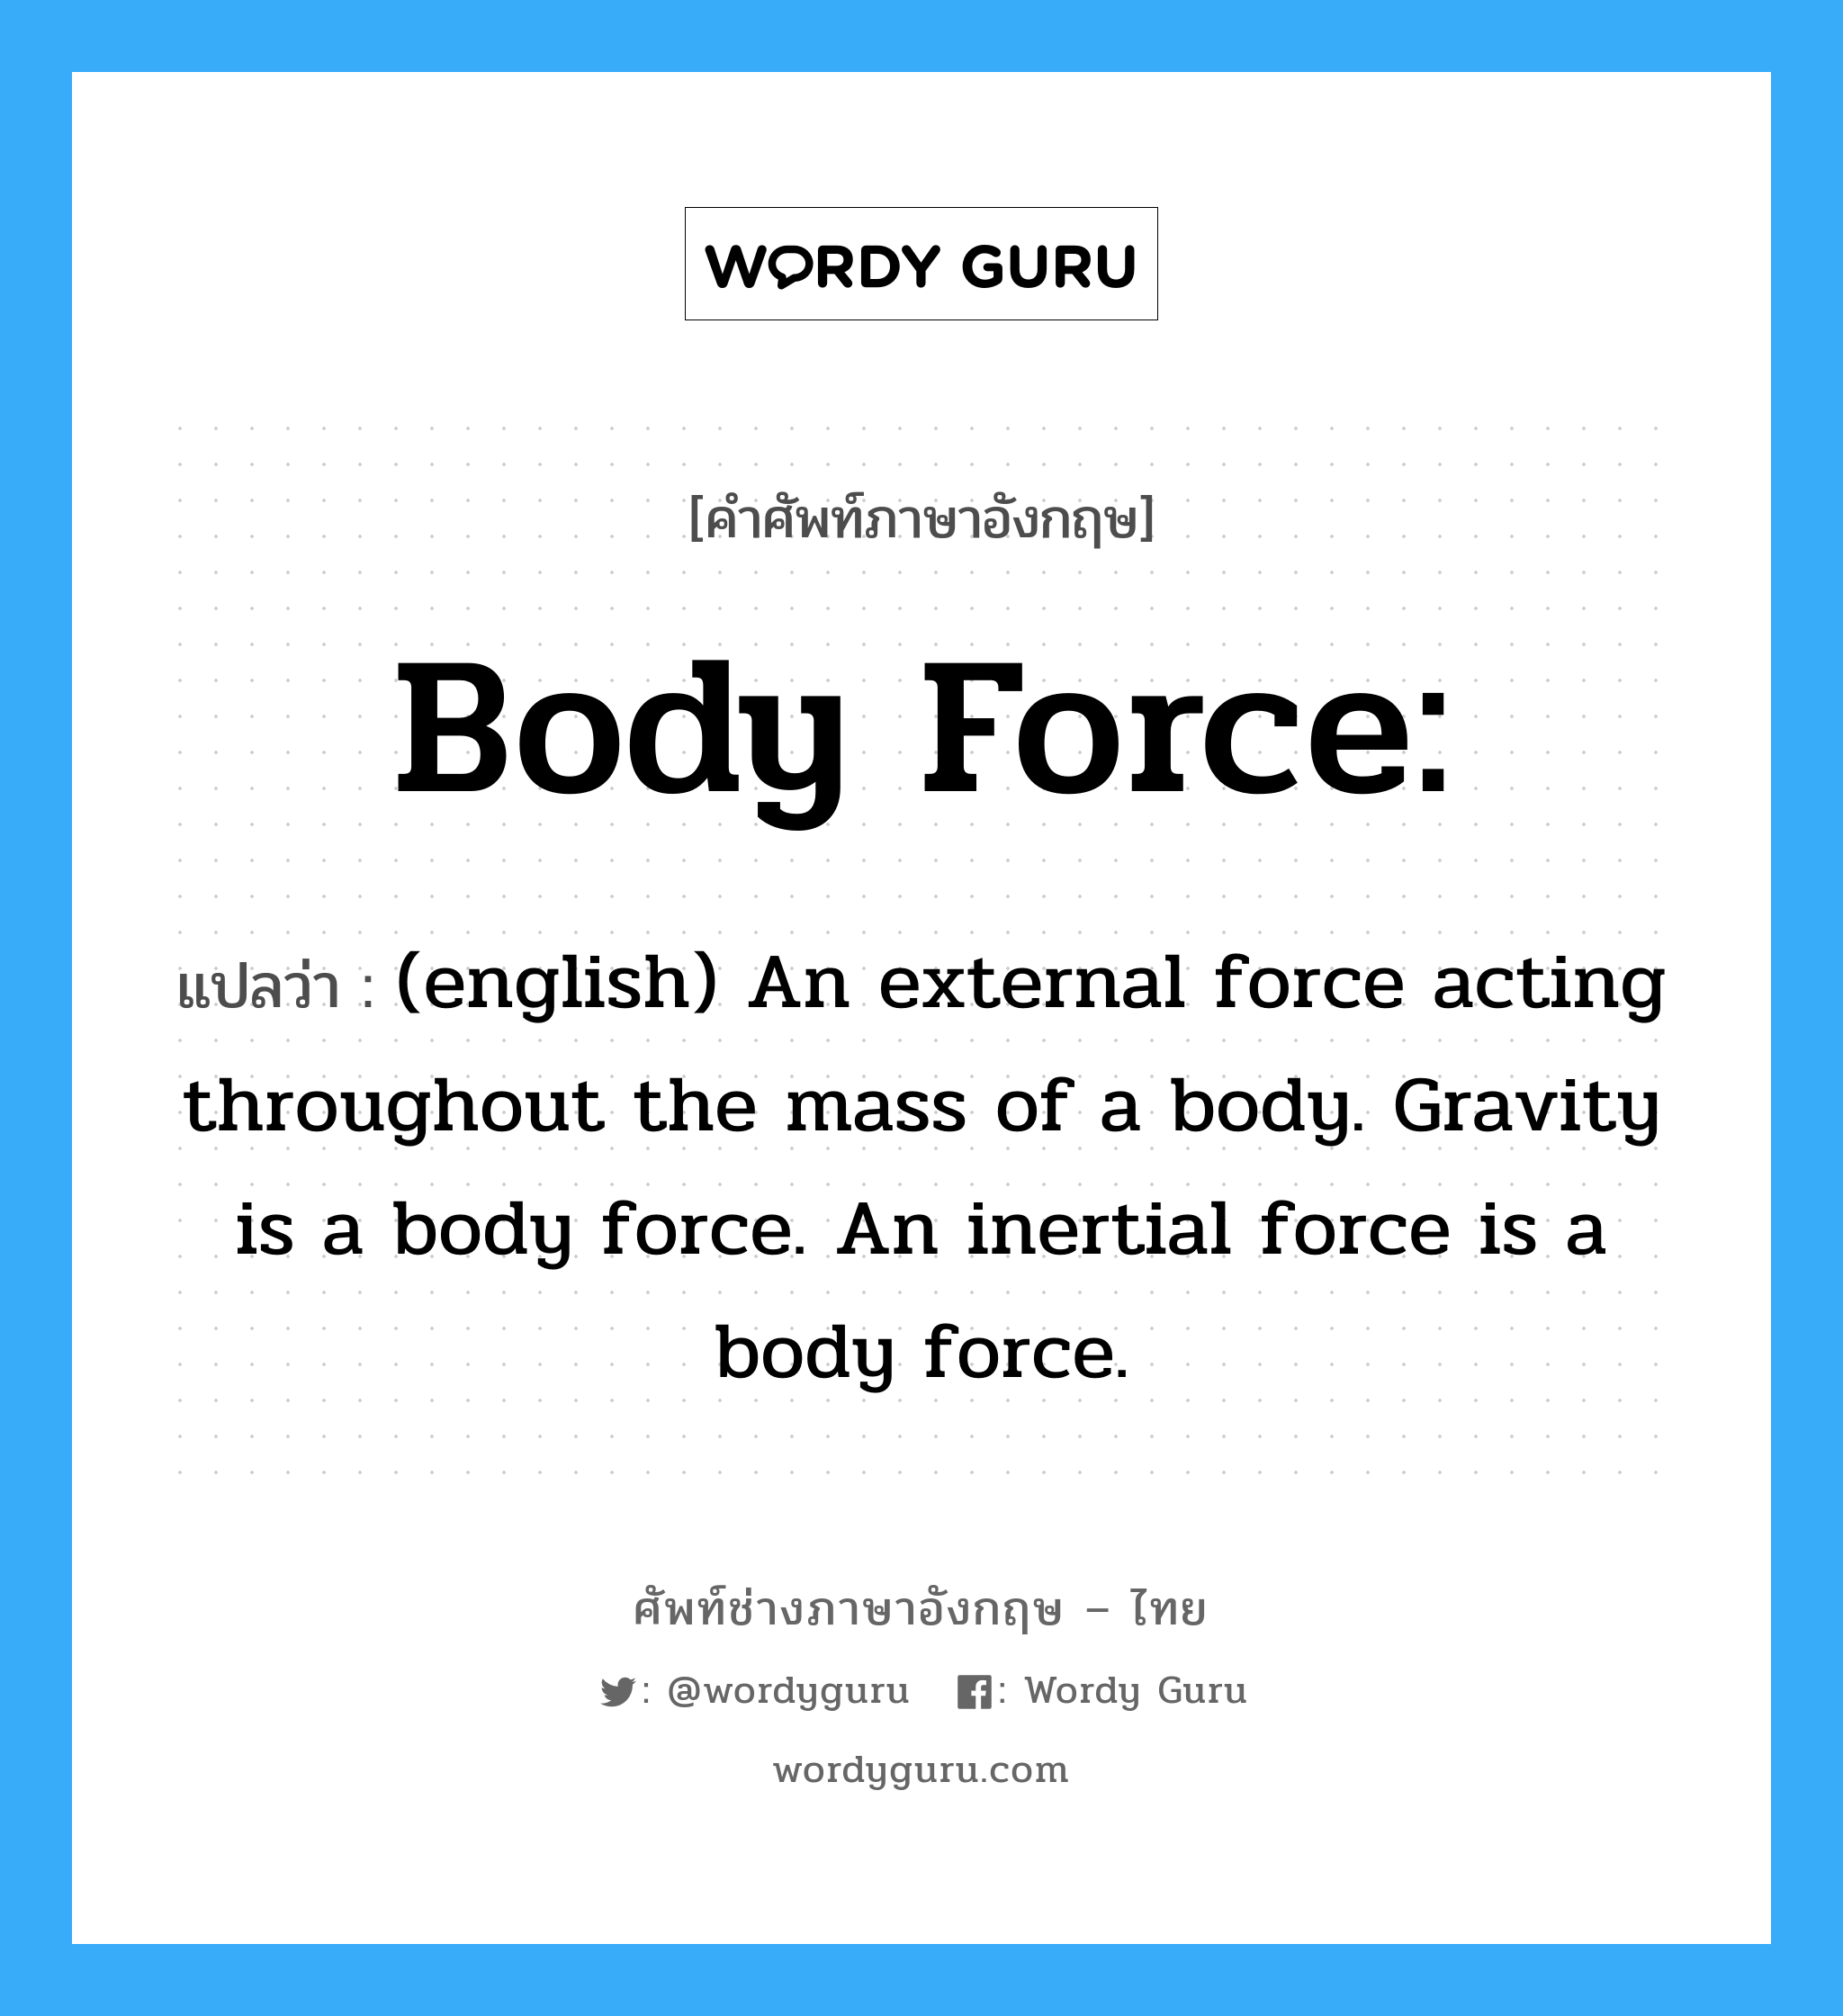 (english) An external force acting throughout the mass of a body. Gravity is a body force. An inertial force is a body force. ภาษาอังกฤษ?, คำศัพท์ช่างภาษาอังกฤษ - ไทย (english) An external force acting throughout the mass of a body. Gravity is a body force. An inertial force is a body force. คำศัพท์ภาษาอังกฤษ (english) An external force acting throughout the mass of a body. Gravity is a body force. An inertial force is a body force. แปลว่า Body force: